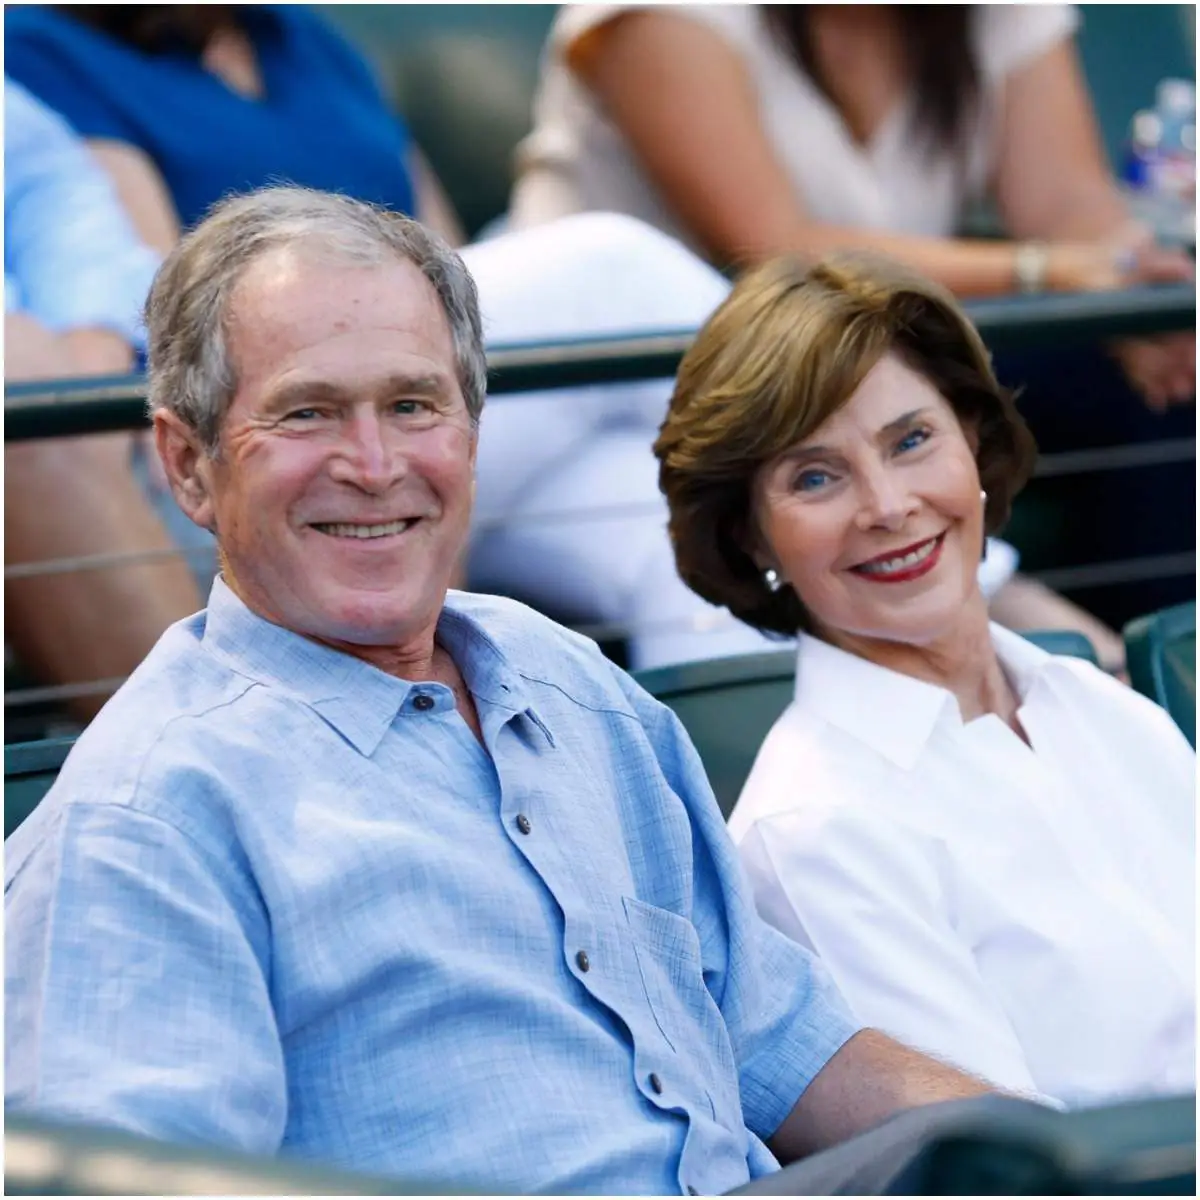 George W. Bush and his wife Laura Welch